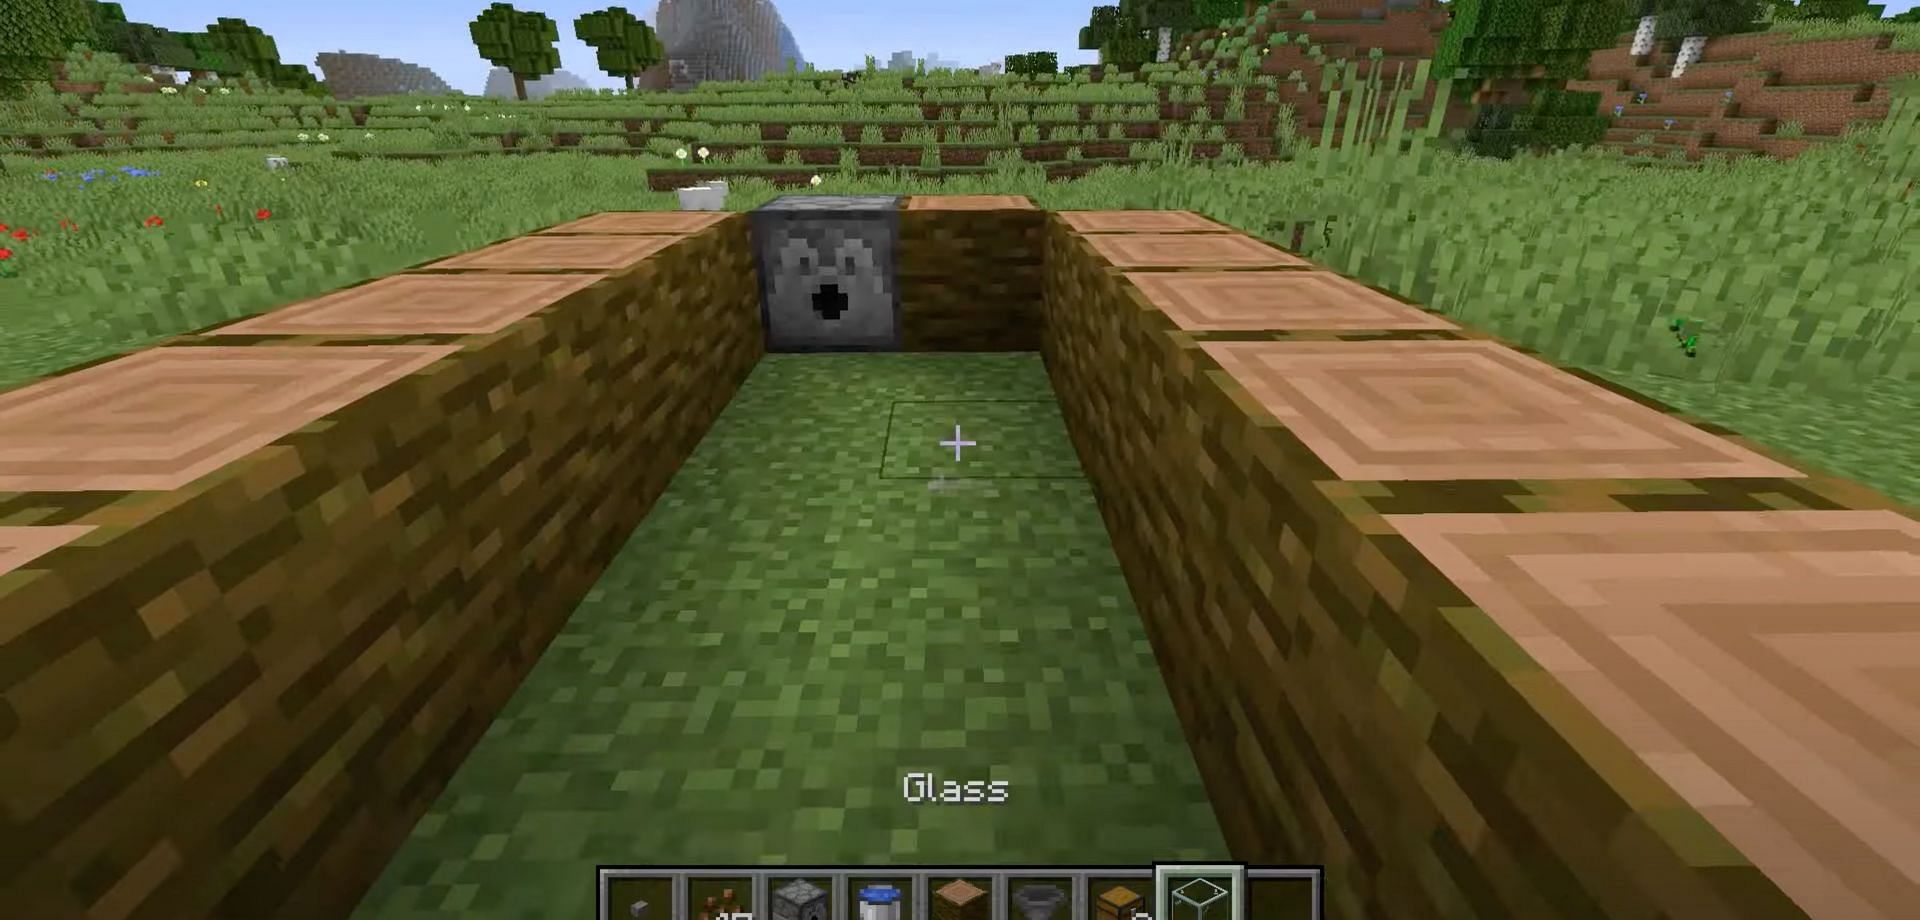 Place a dispenser next to a jungle log in between the rows (Image via NaMiature/YouTube)